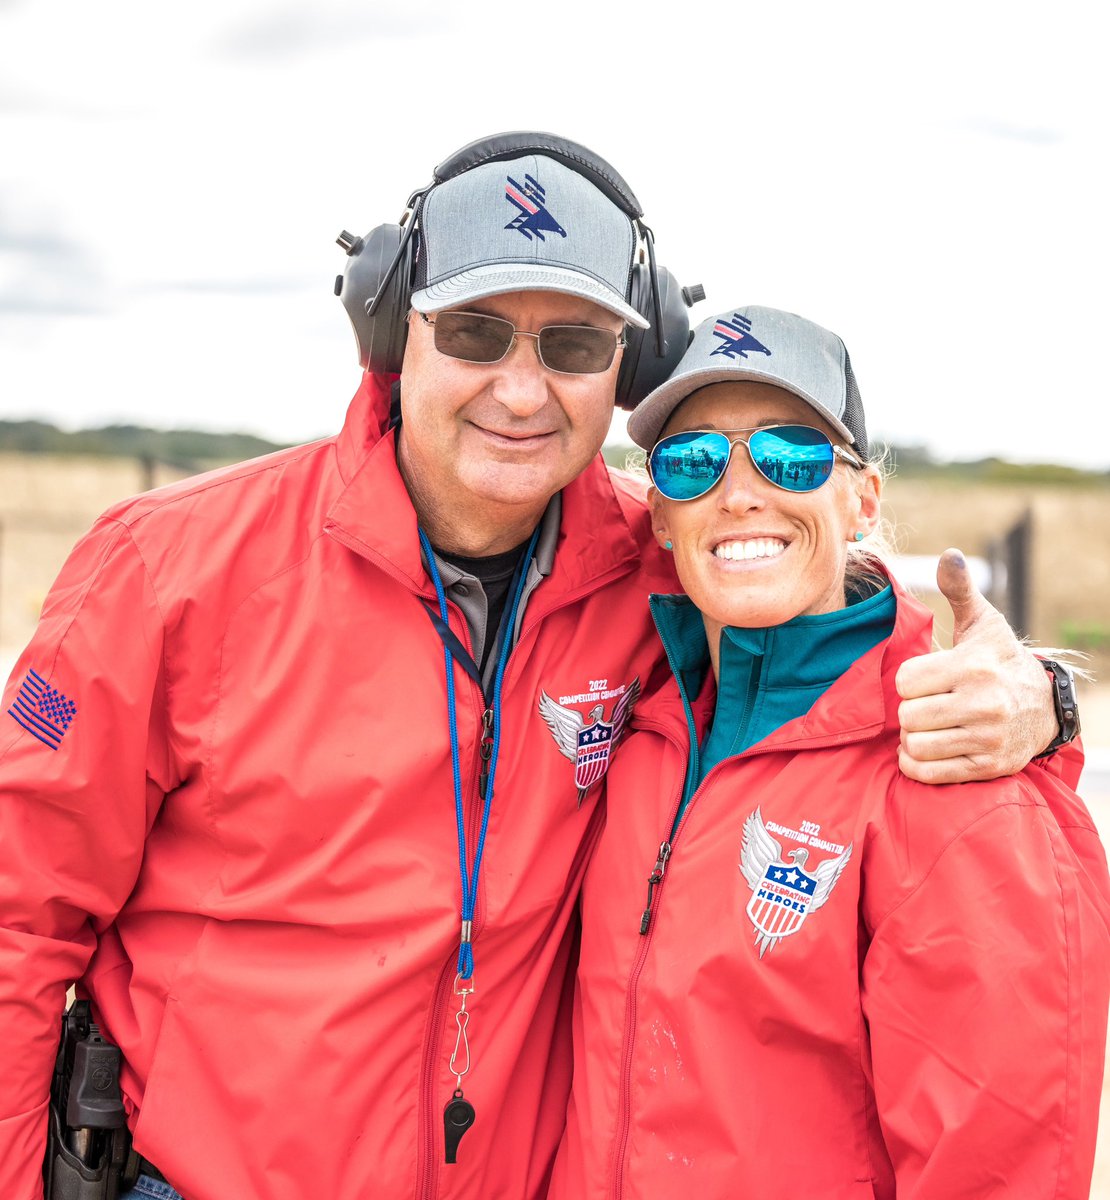 Challenge yourself, achieve your goals and have fun!

#PrairieFireNevada will be a place where all are welcome, adventure is encouraged and community is formed - the ultimate American experience. 

Stay tuned for more exciting details!

#guns #gunlifestyle #gunlife